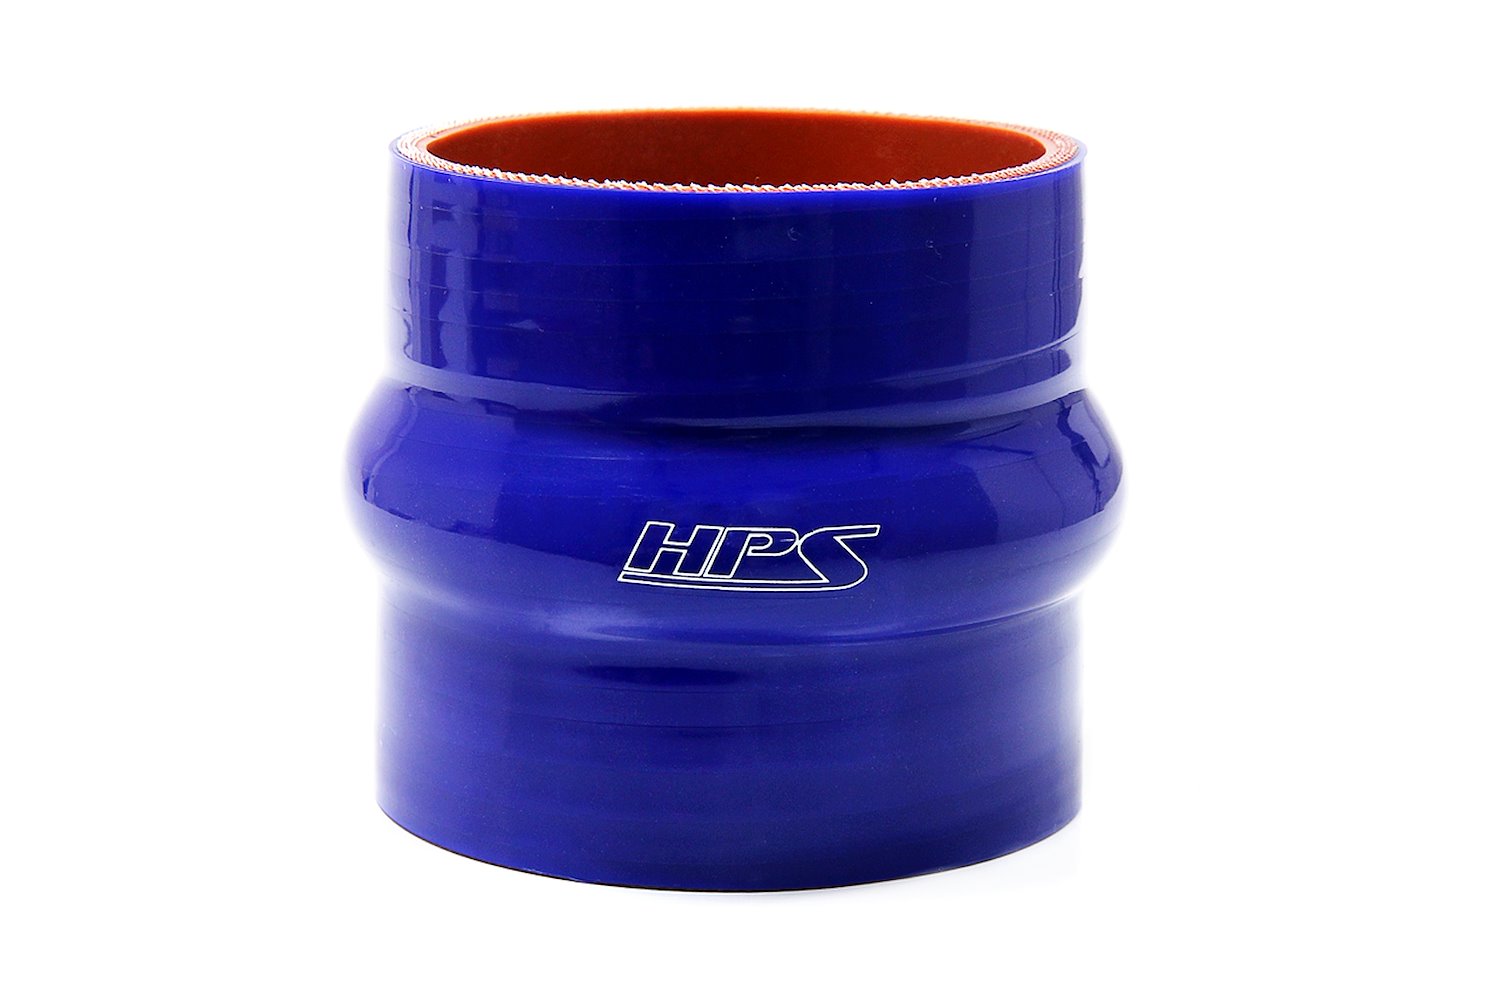 HTSHC-100-L4-BLUE Silicone Hump Coupler Hose, High-Temp 4-Ply Reinforced, 1 in. ID, 4 in. Long, Blue